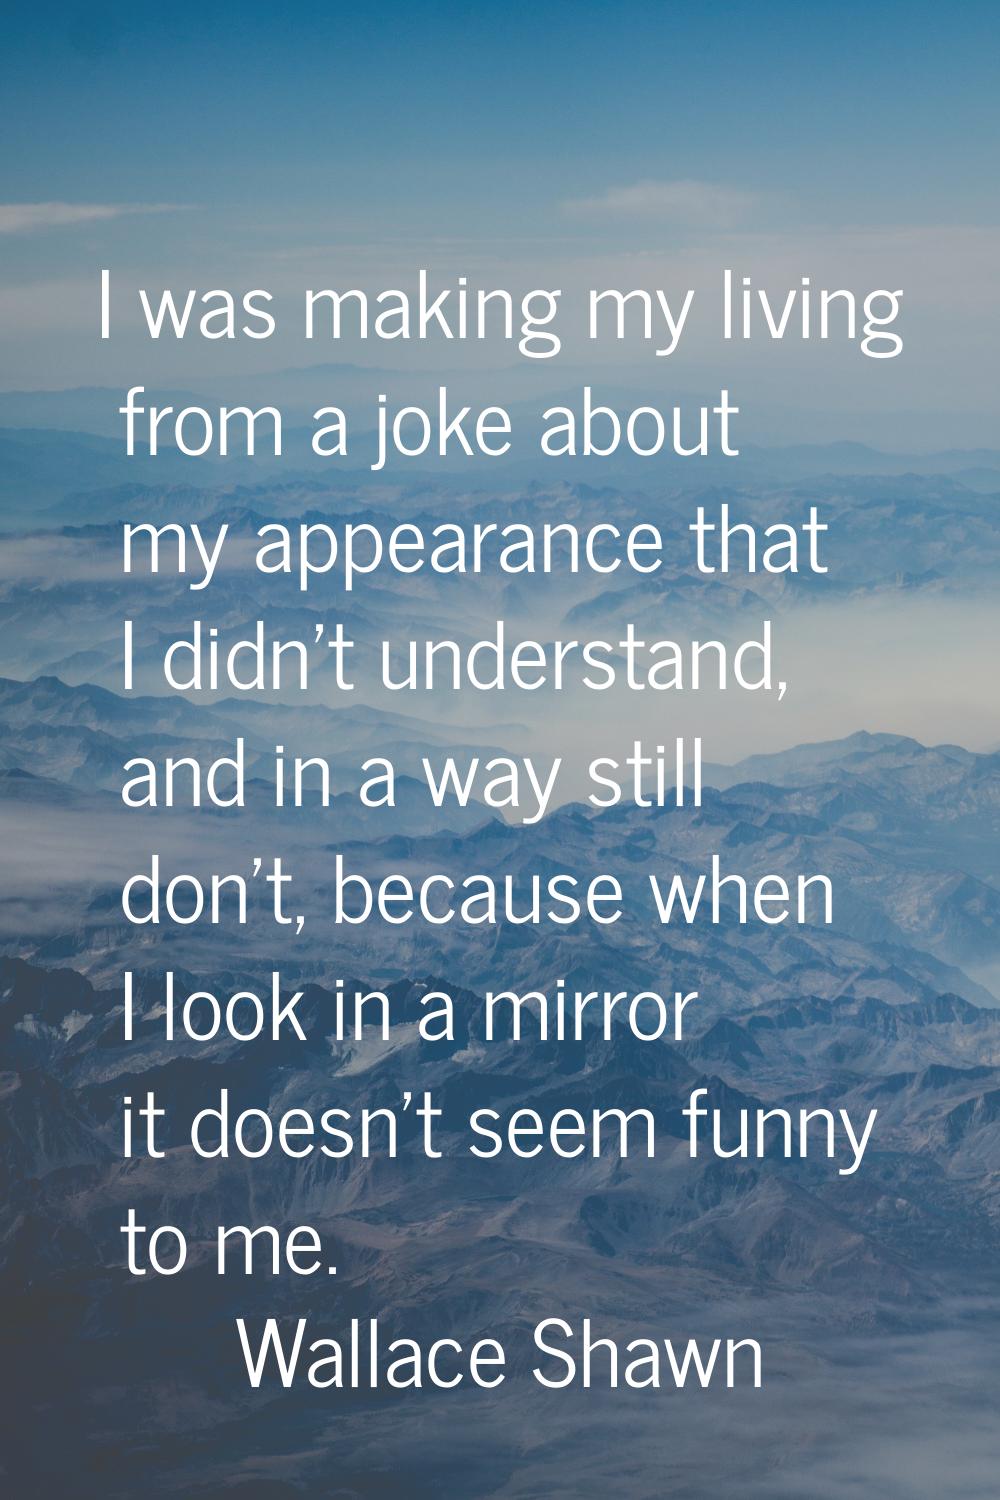 I was making my living from a joke about my appearance that I didn't understand, and in a way still